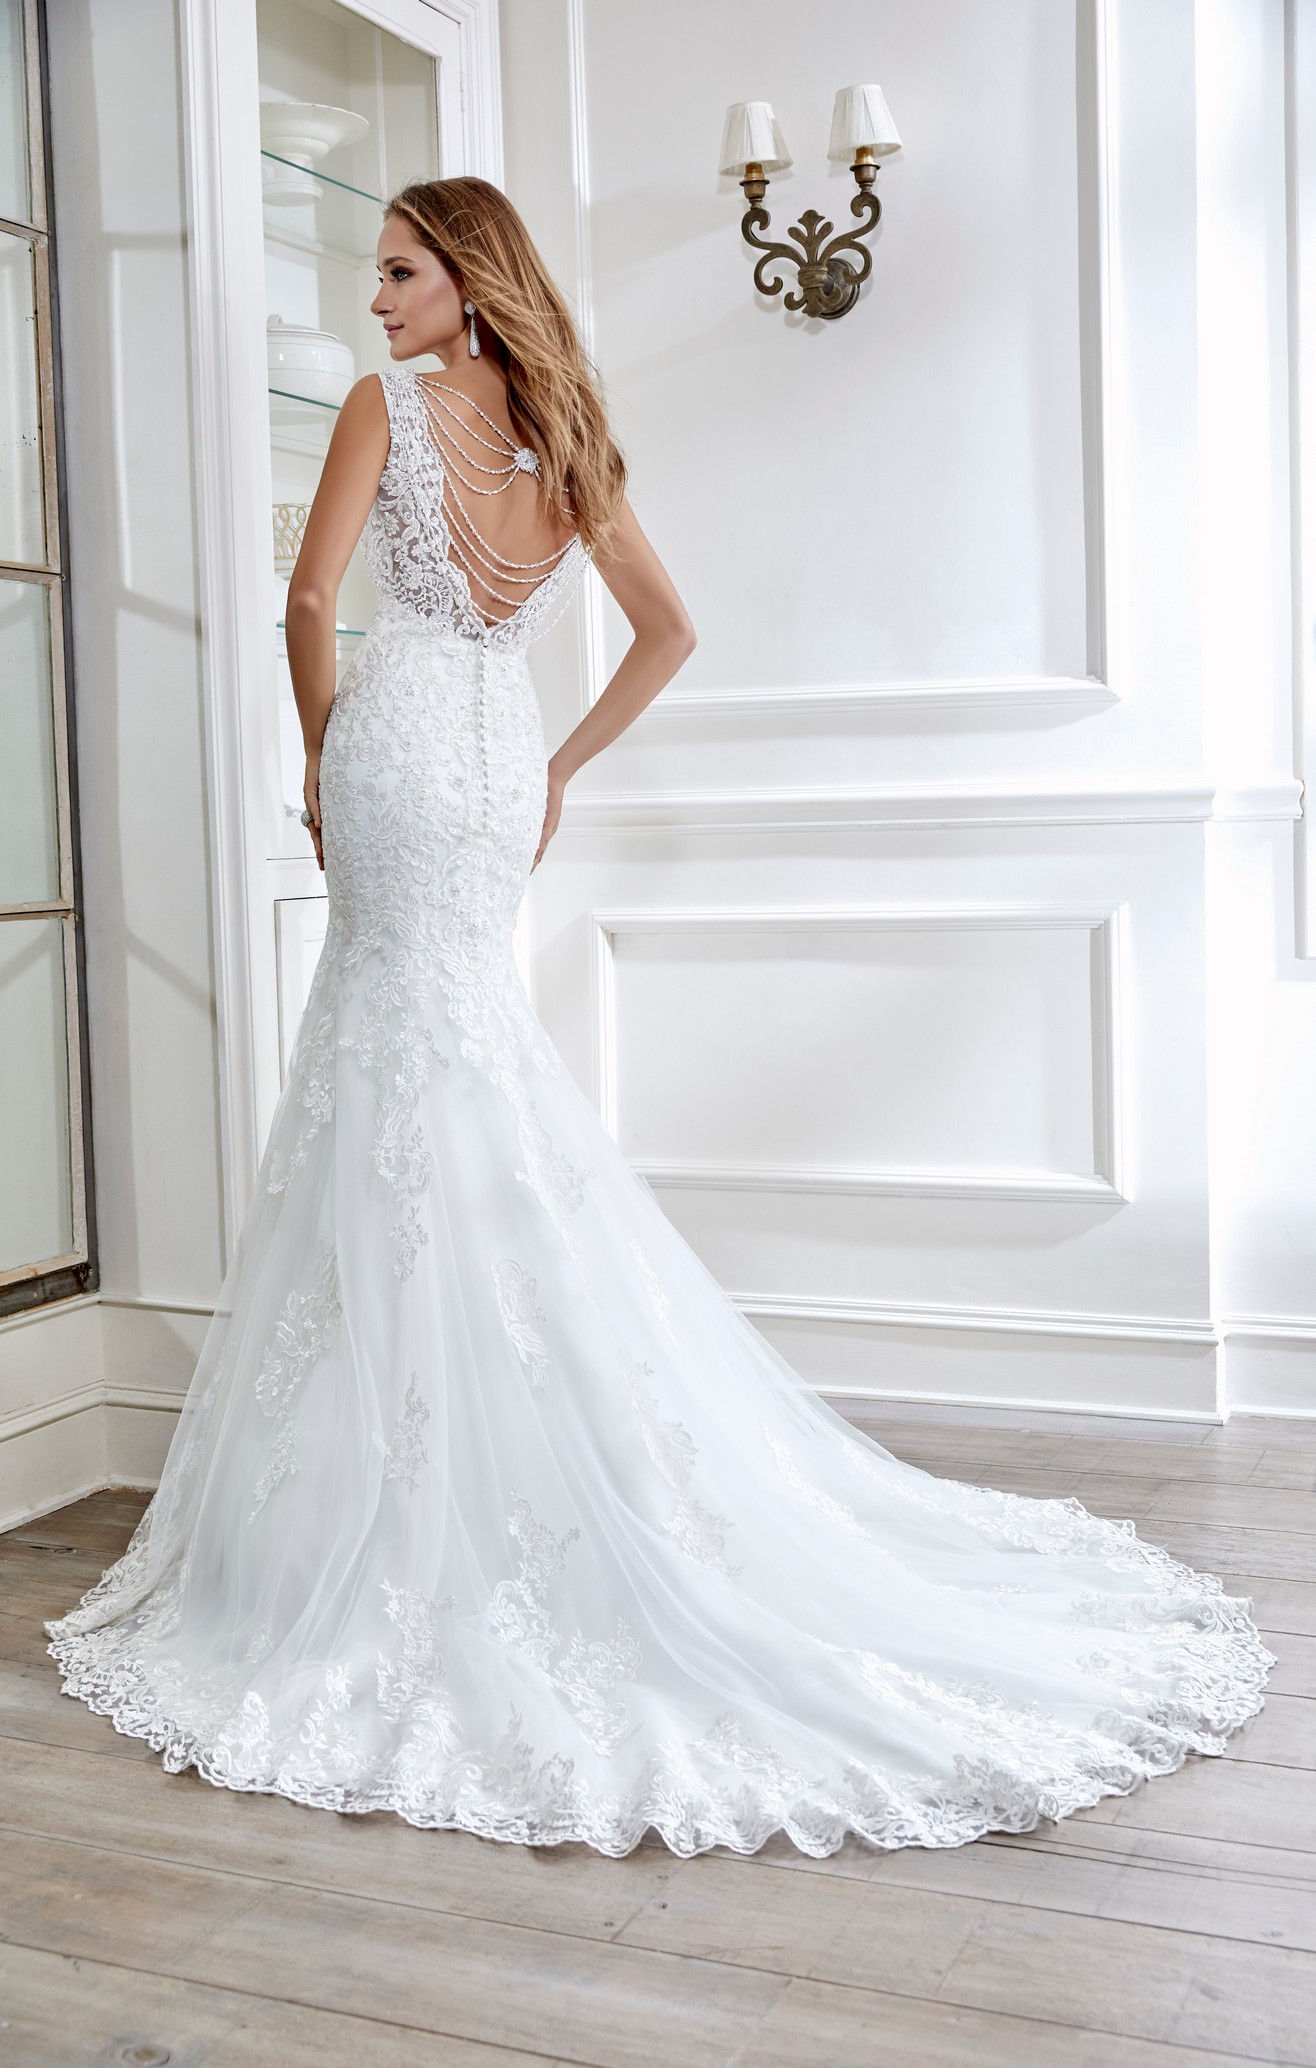 Woman standing in front of mirror wearing mermaid wedding dress with v-neckline and lace appliques